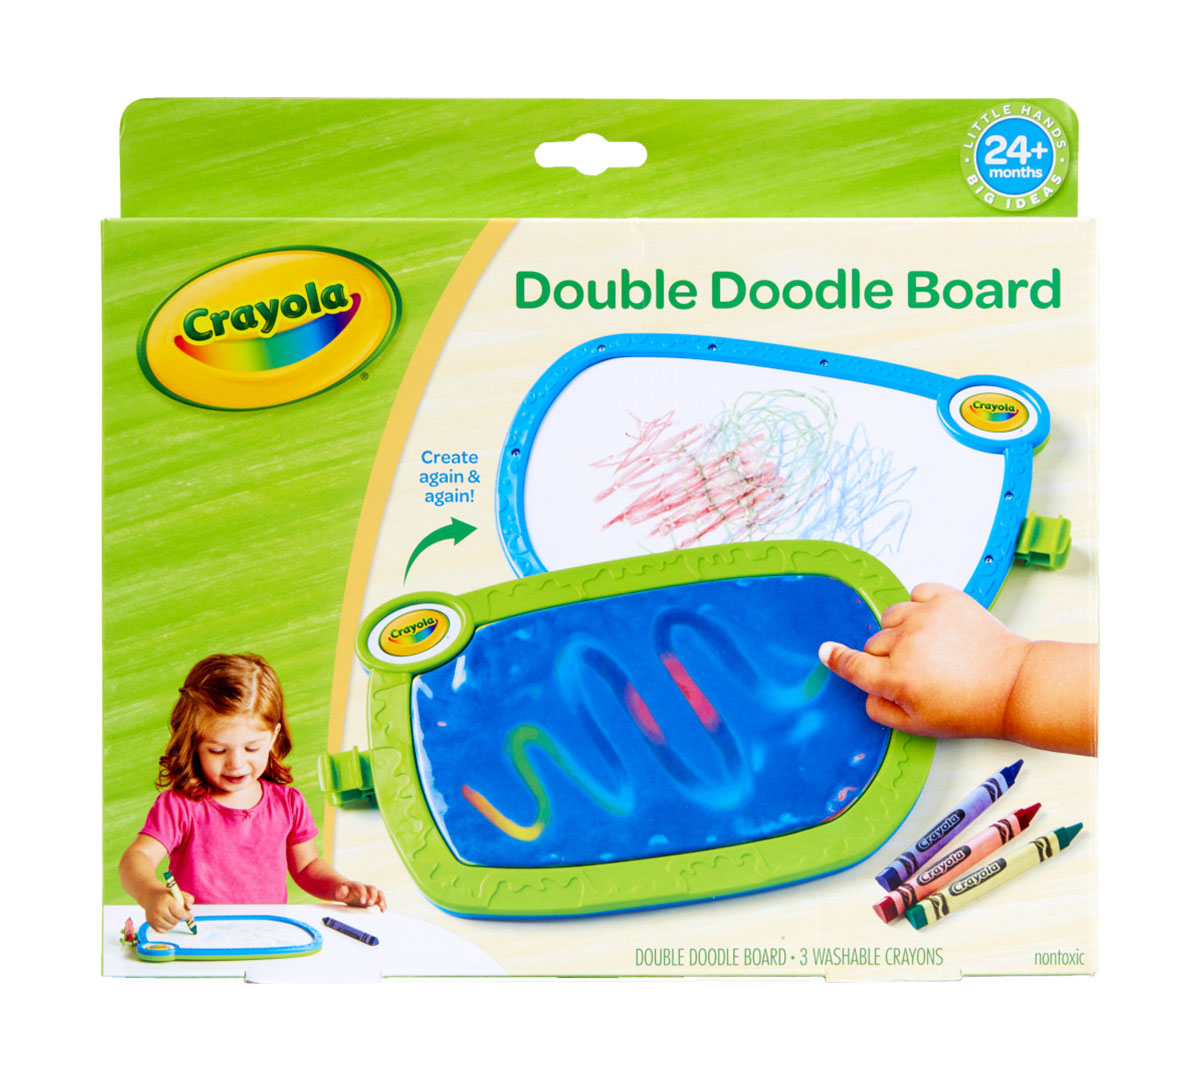 Double Doodle Board, Toddler Tablet, Crayola.com